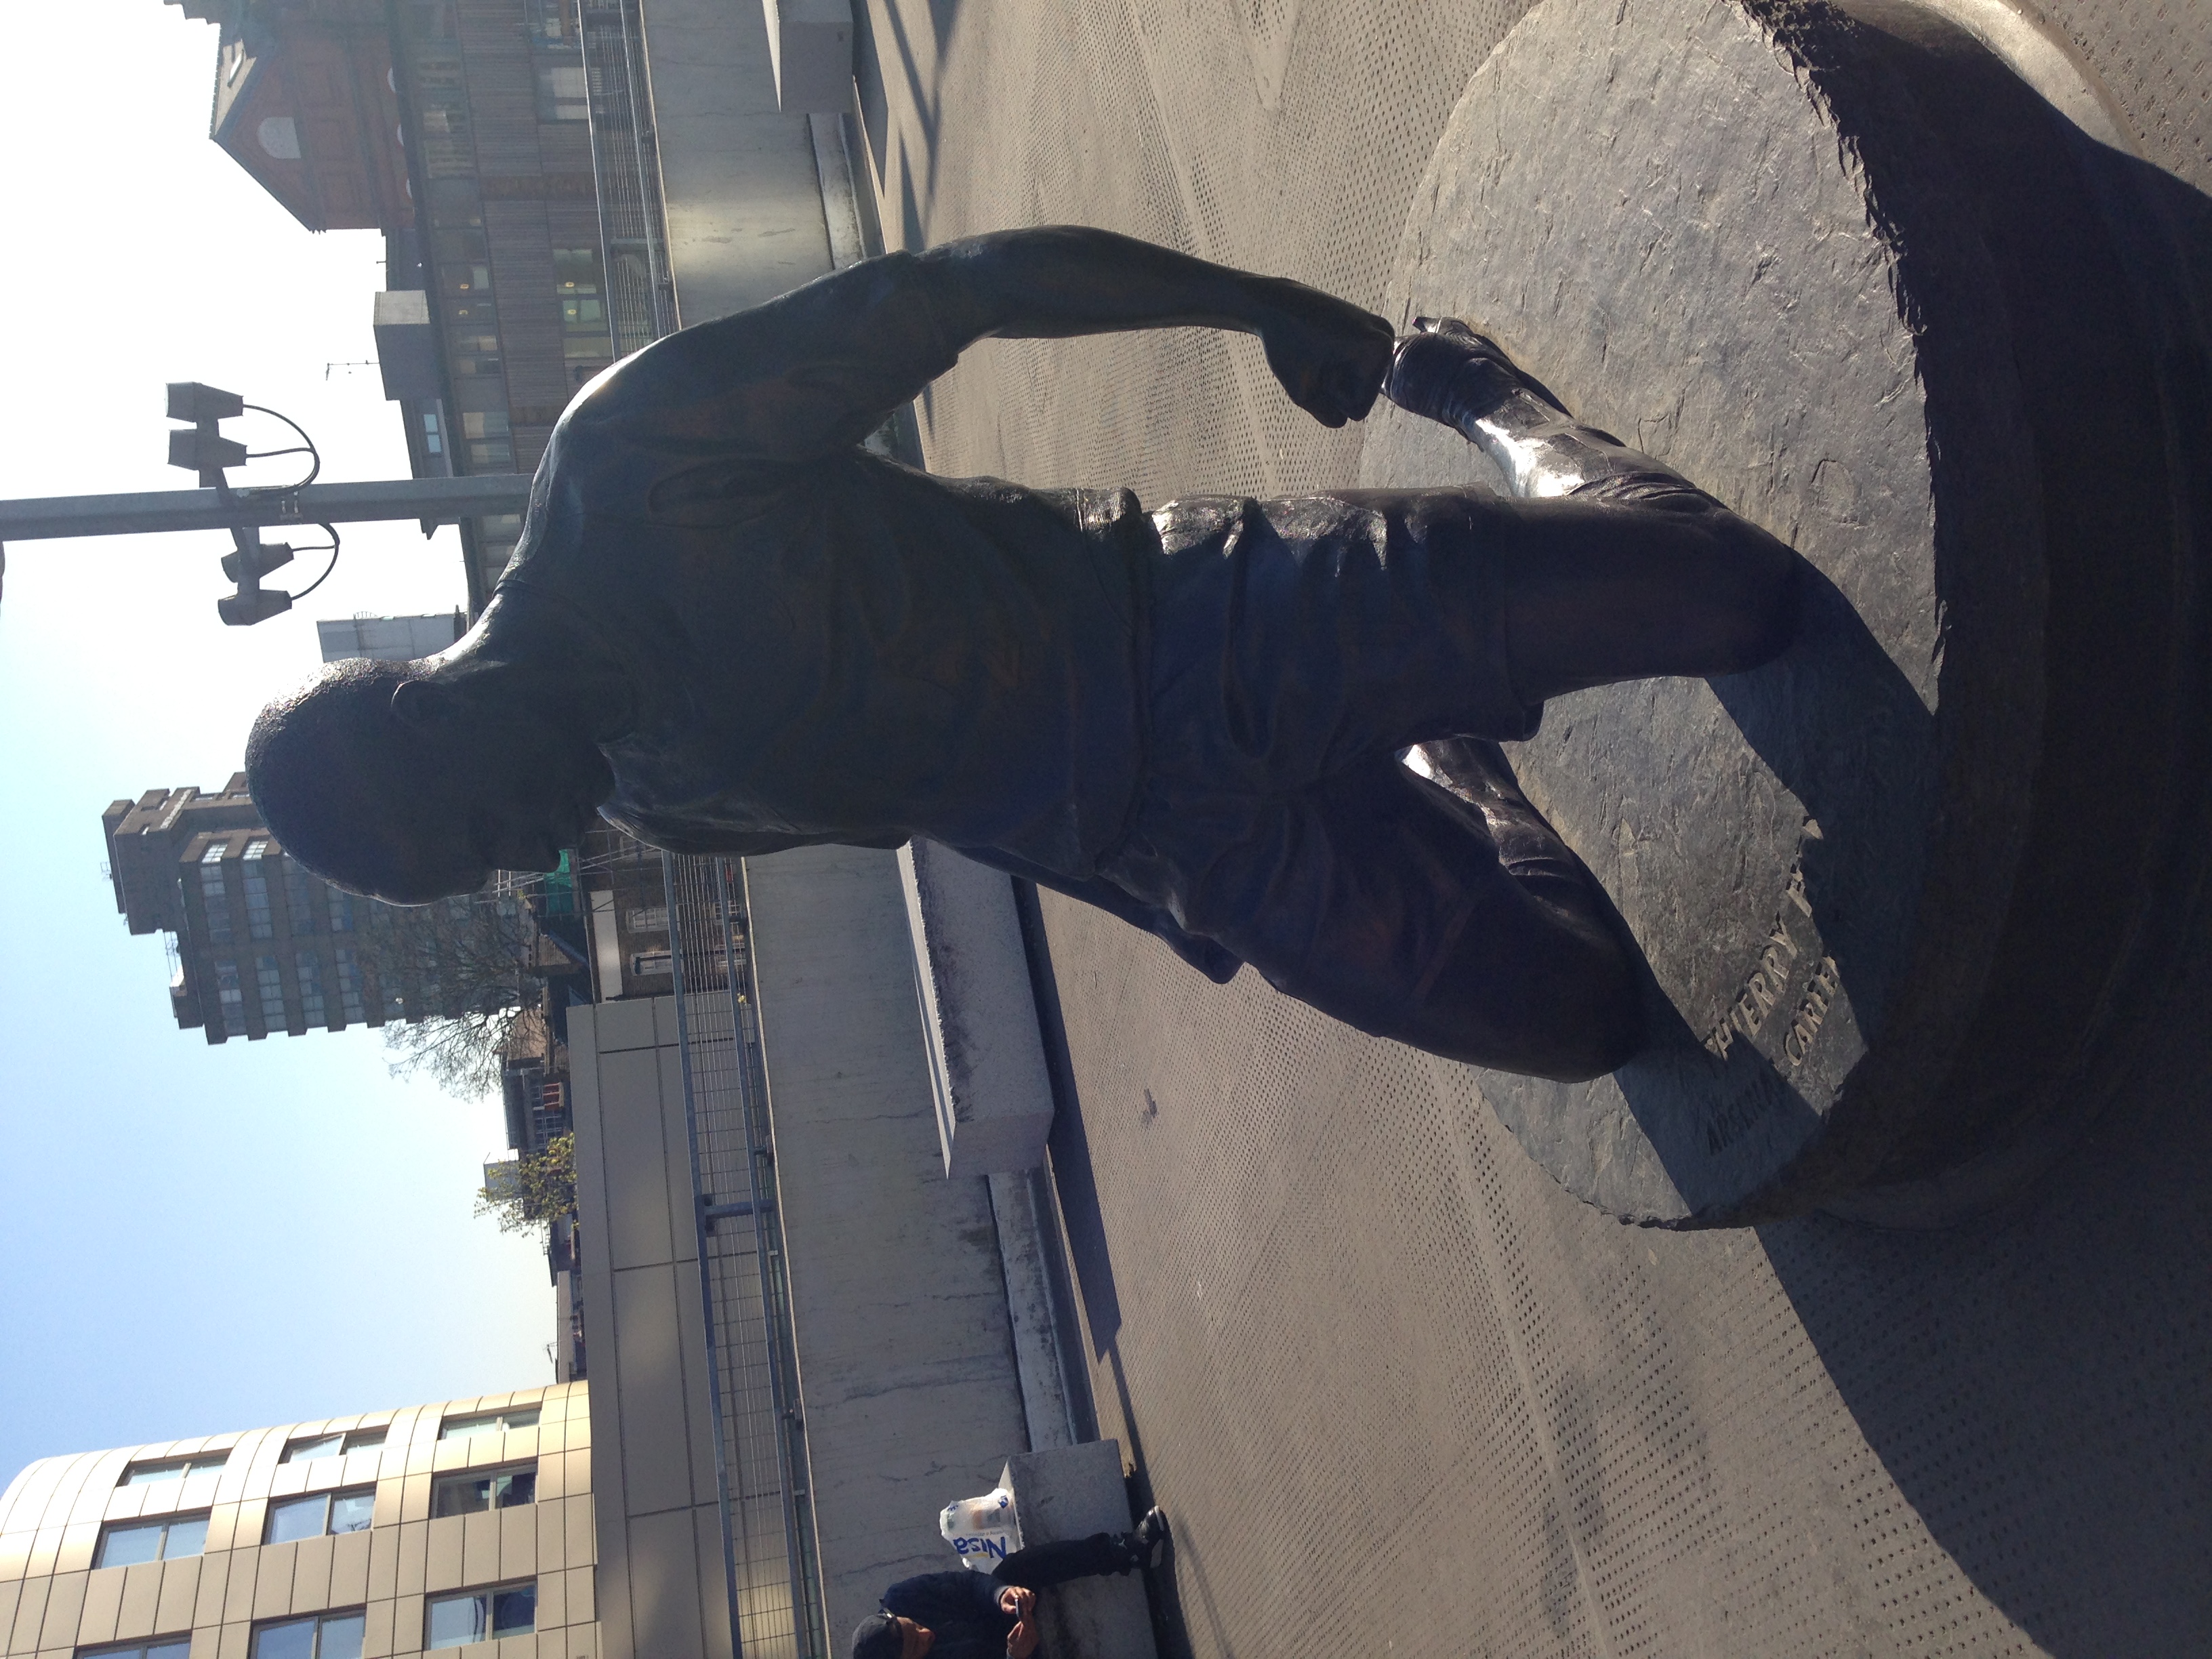 thierry henry statue